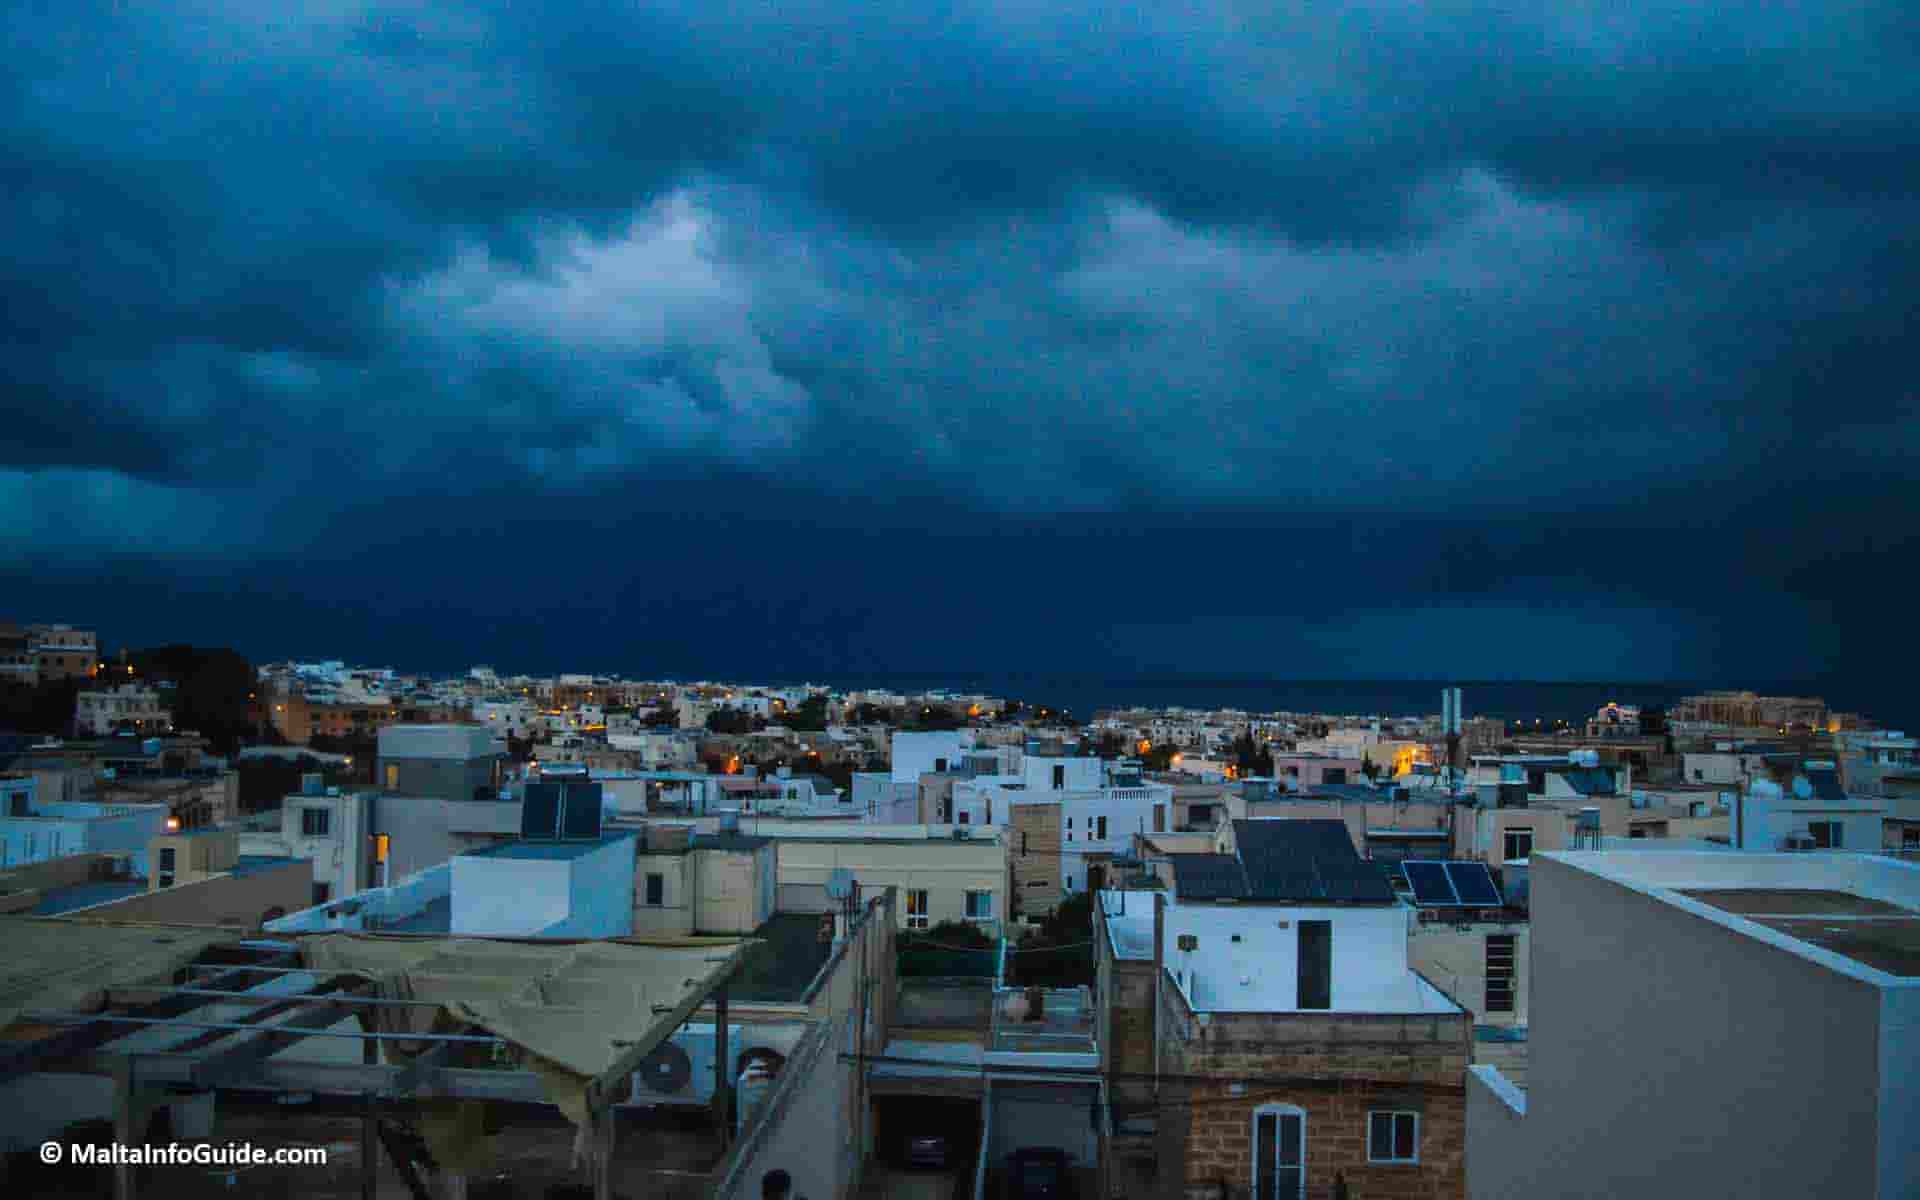 Stormy weather over the island of Malta